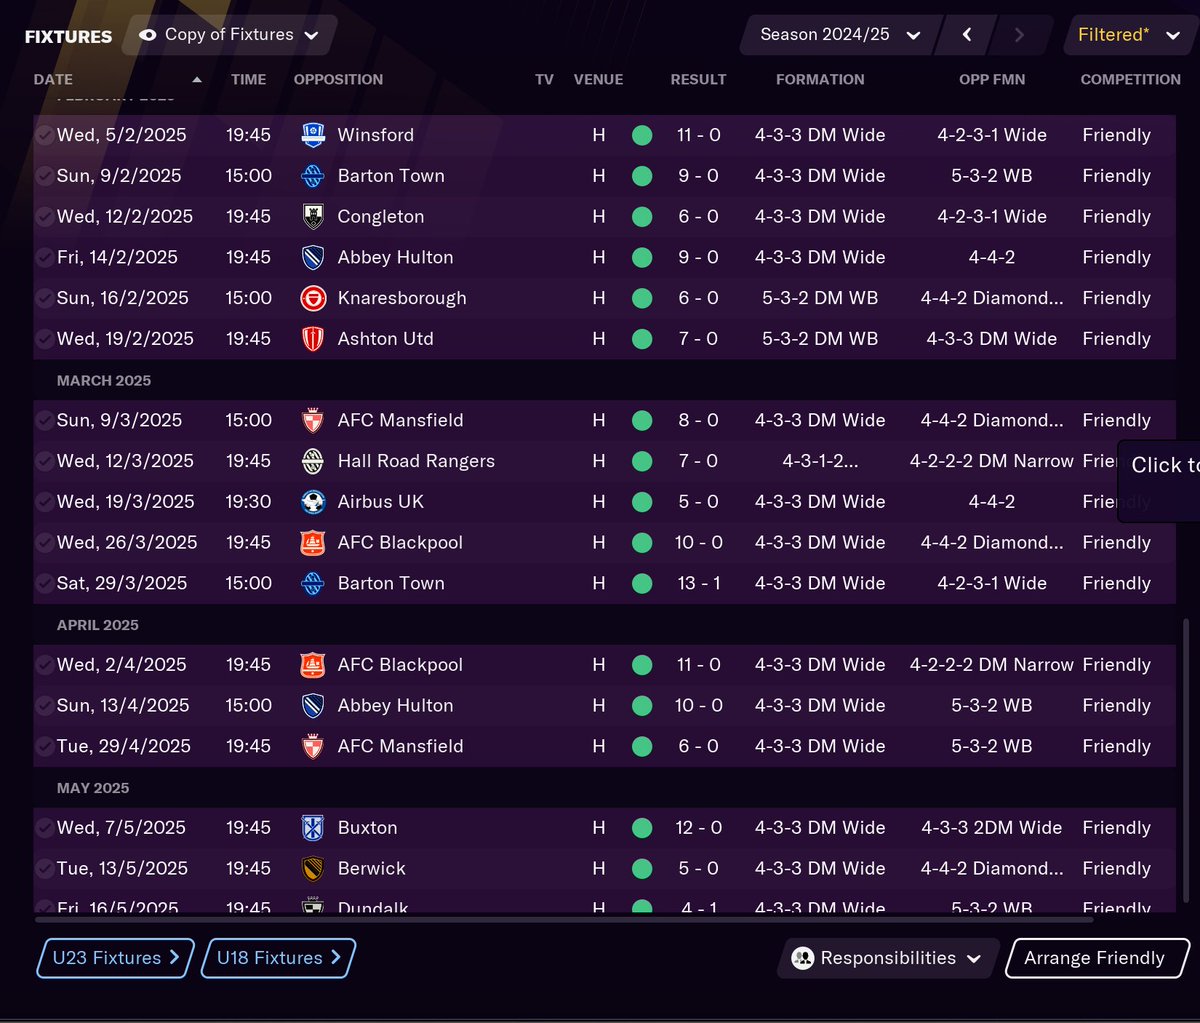 This is the amount of friendlies I played IN THE REGULAR SEASON. 33 friendlies played, 243 goals scored, 5 conceded (excluding pre-season friendlies)